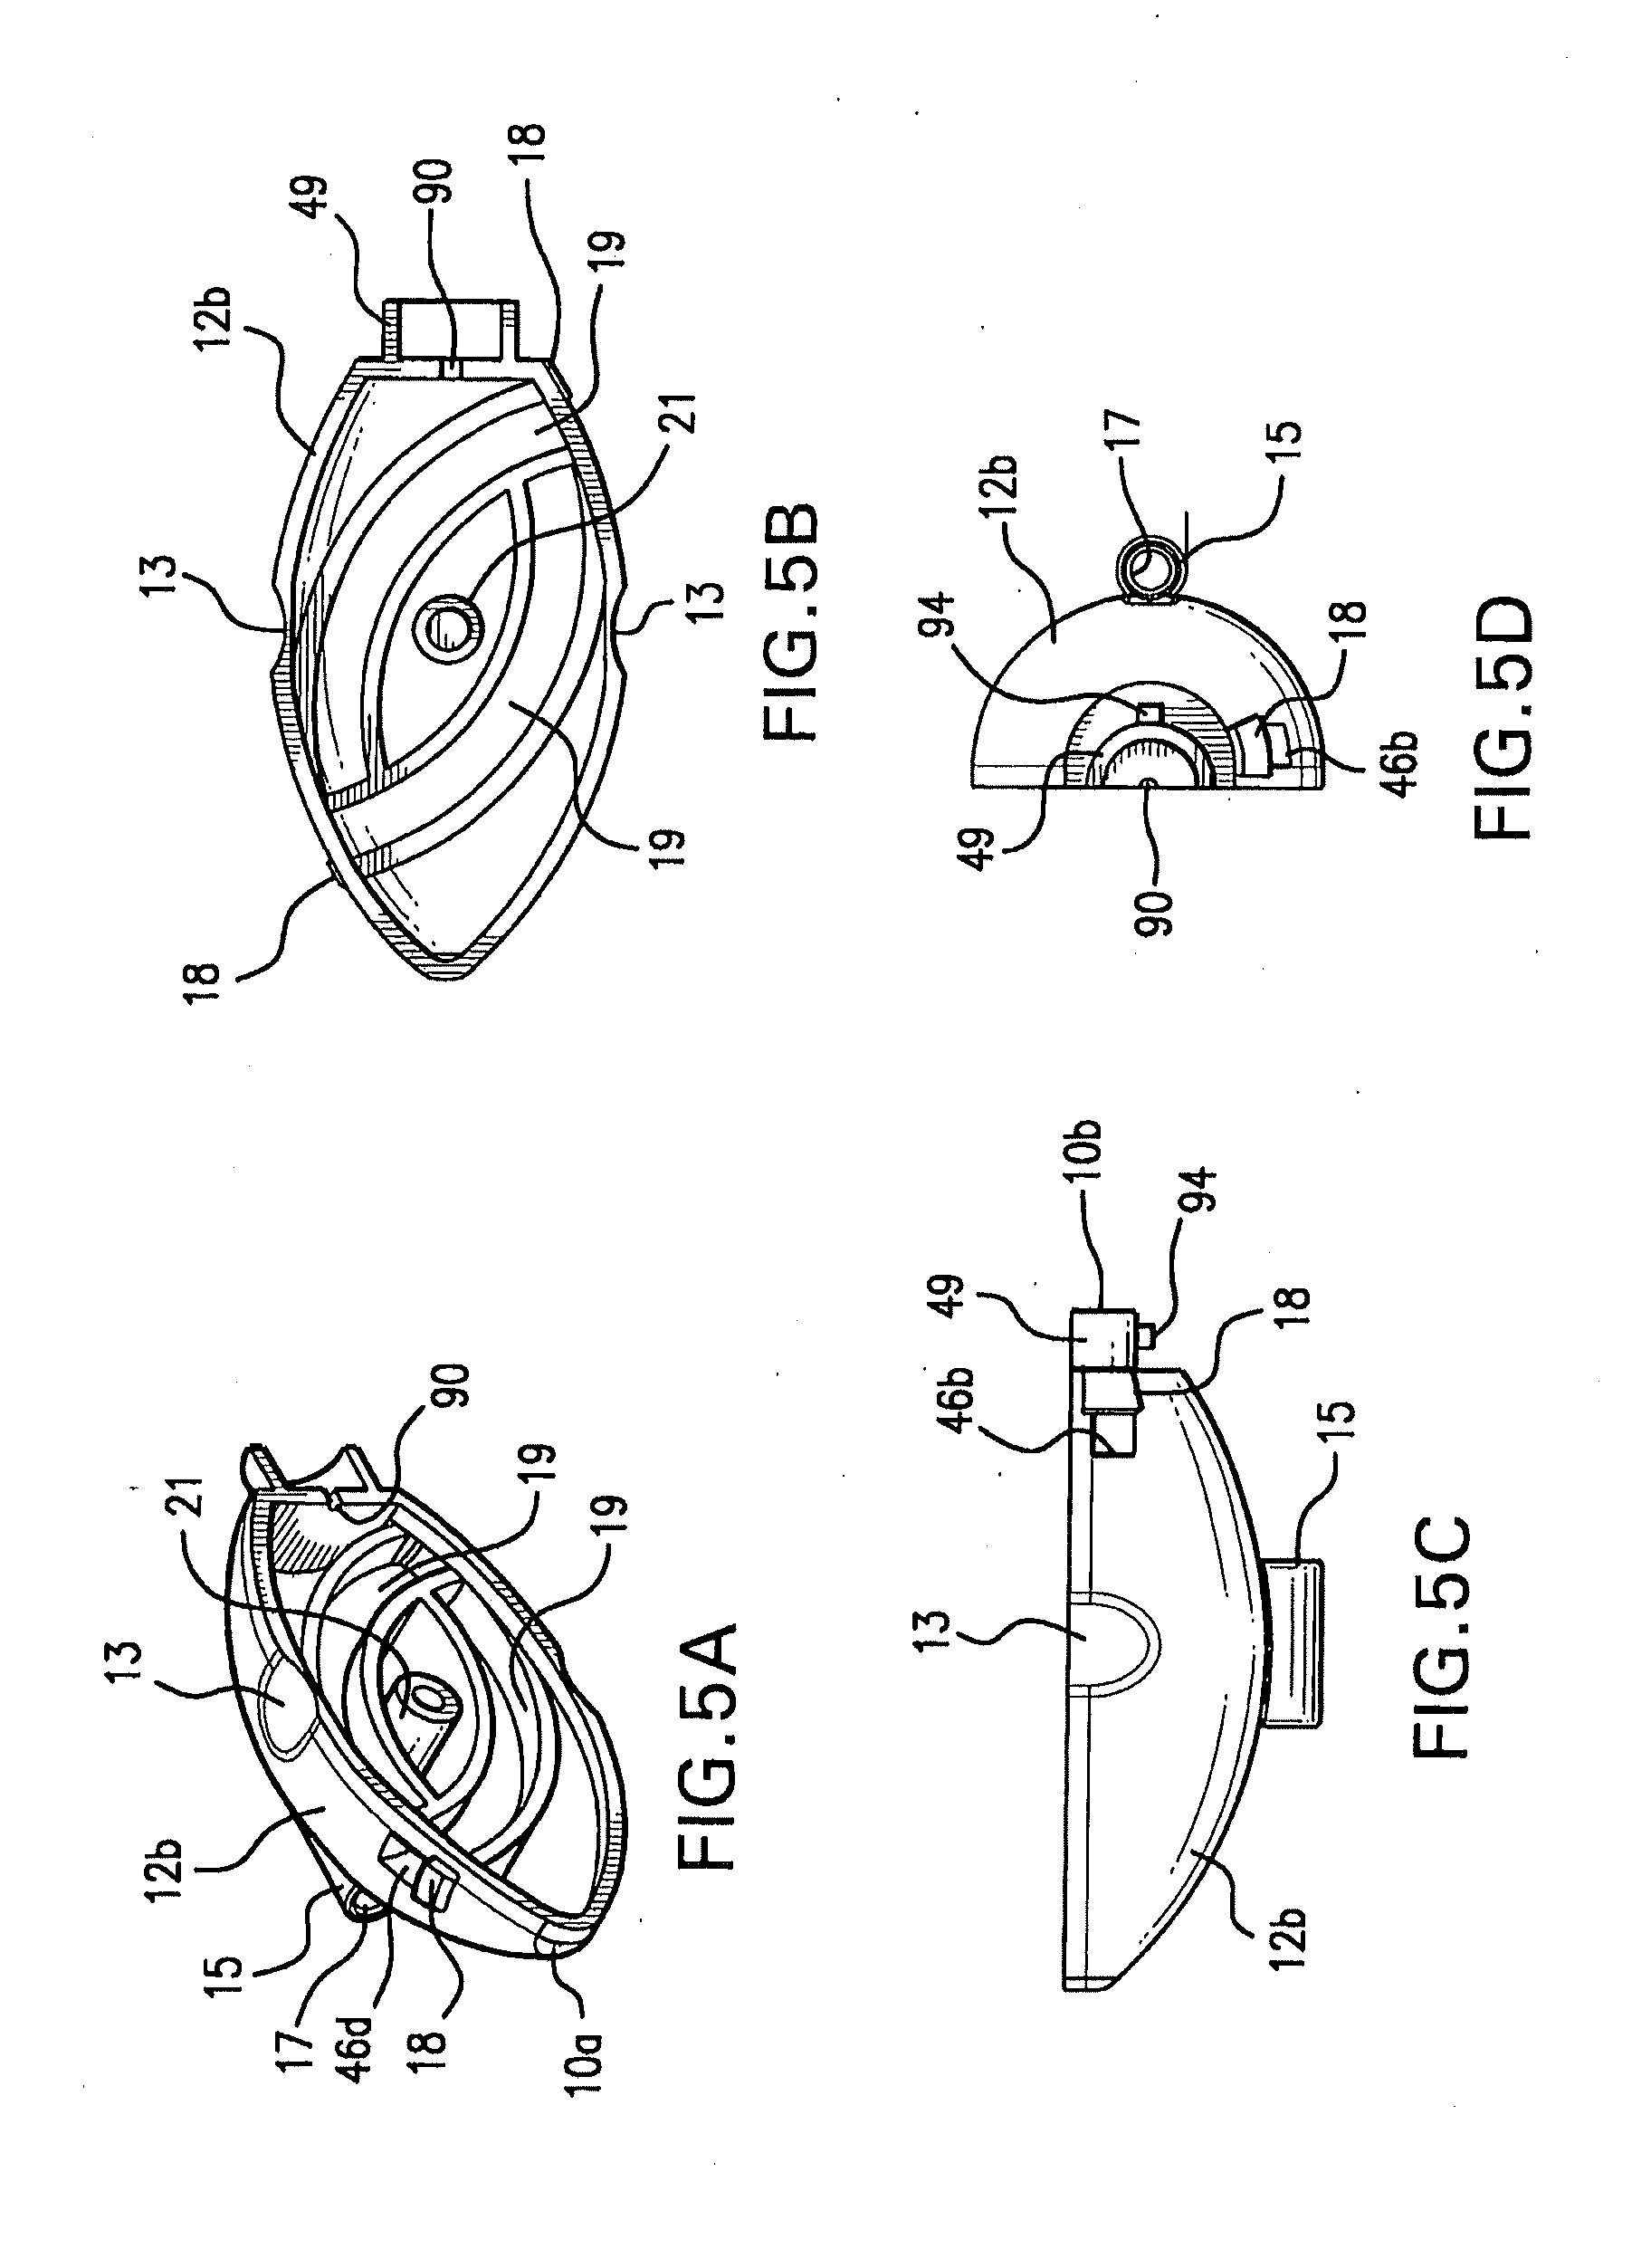 Interspinous implants and methods for implanting same